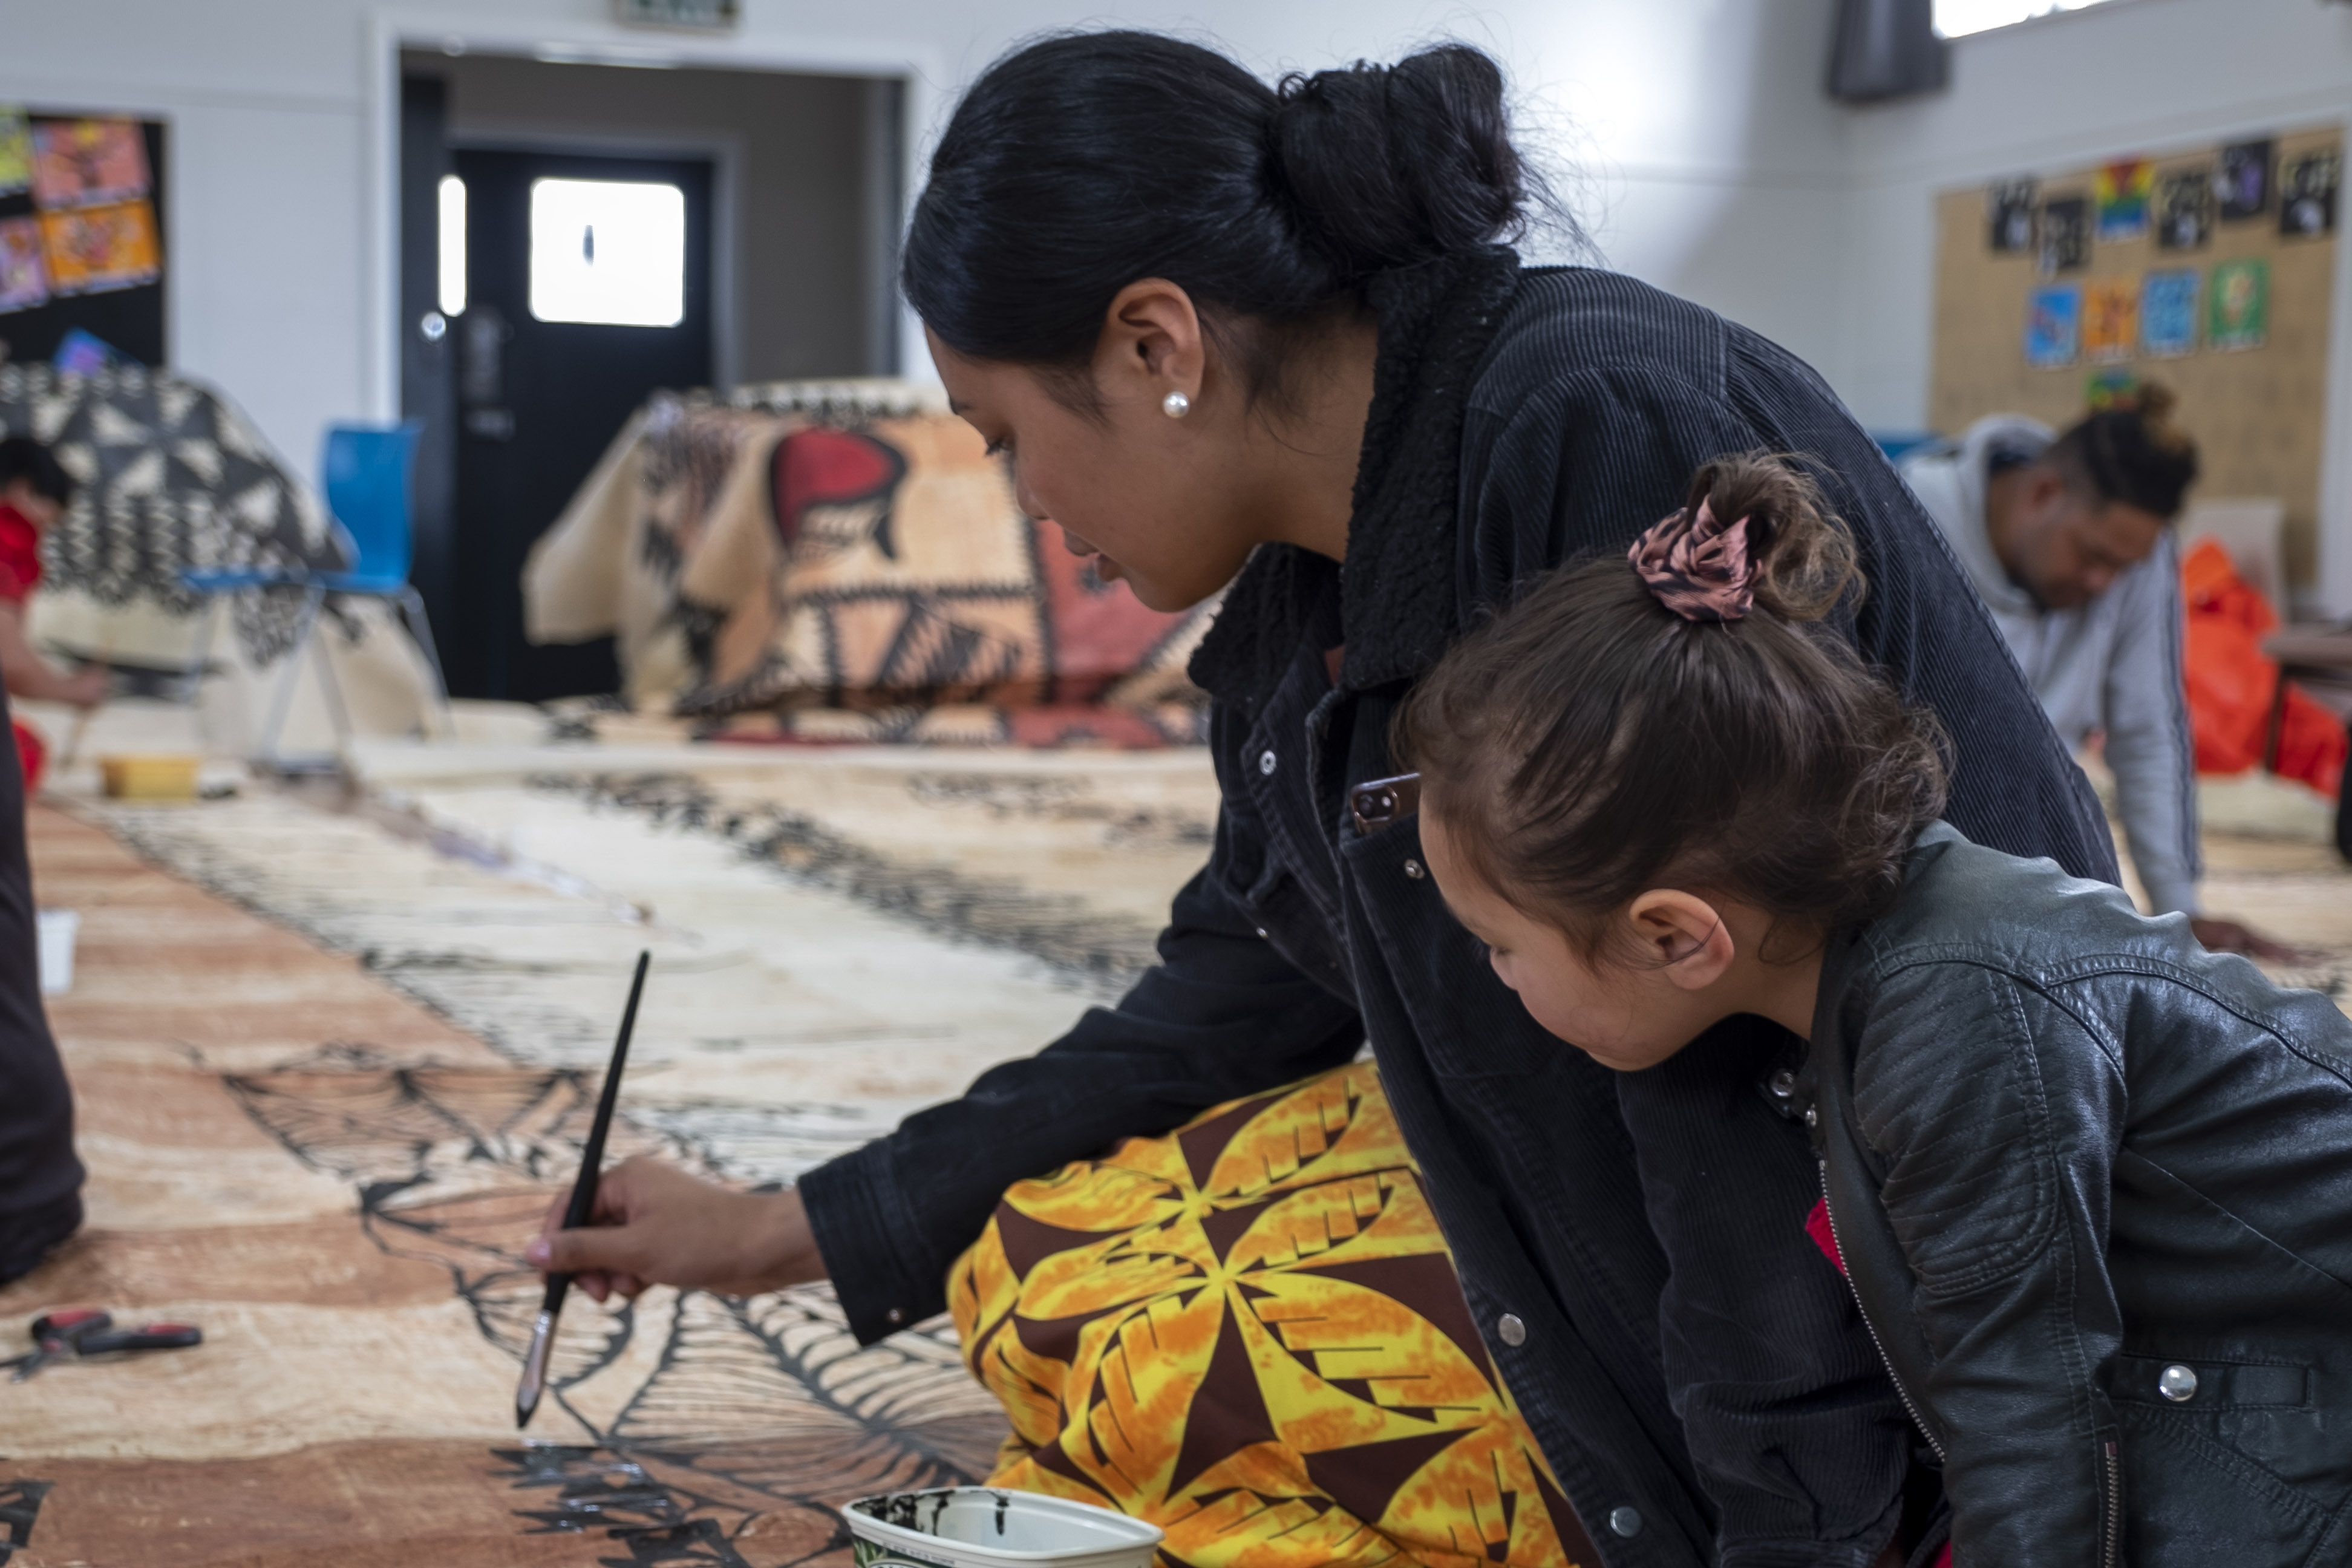 A woman painting black ink on a tapa cloth on the floor, she is being watched by a child.